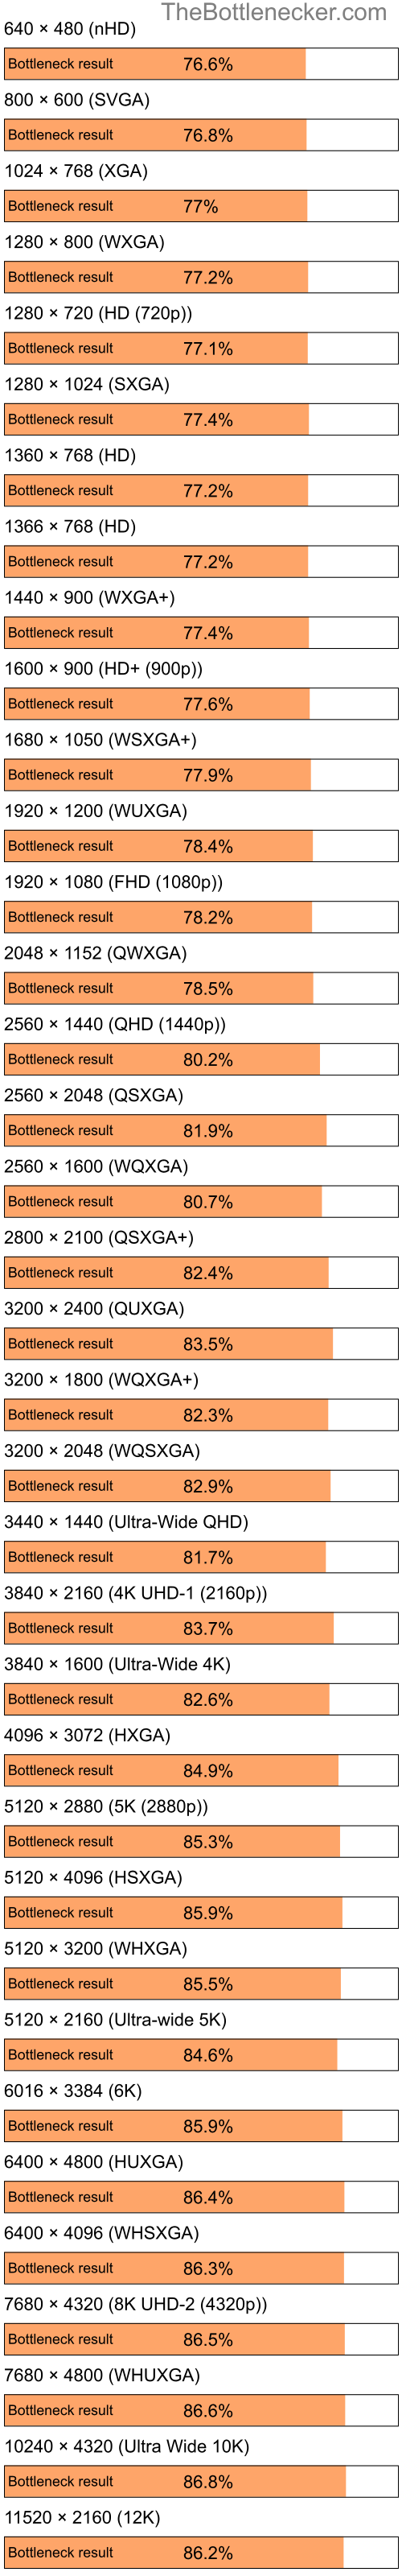 Bottleneck results by resolution for Intel Pentium 4 and NVIDIA GeForce 6150 LE in General Tasks